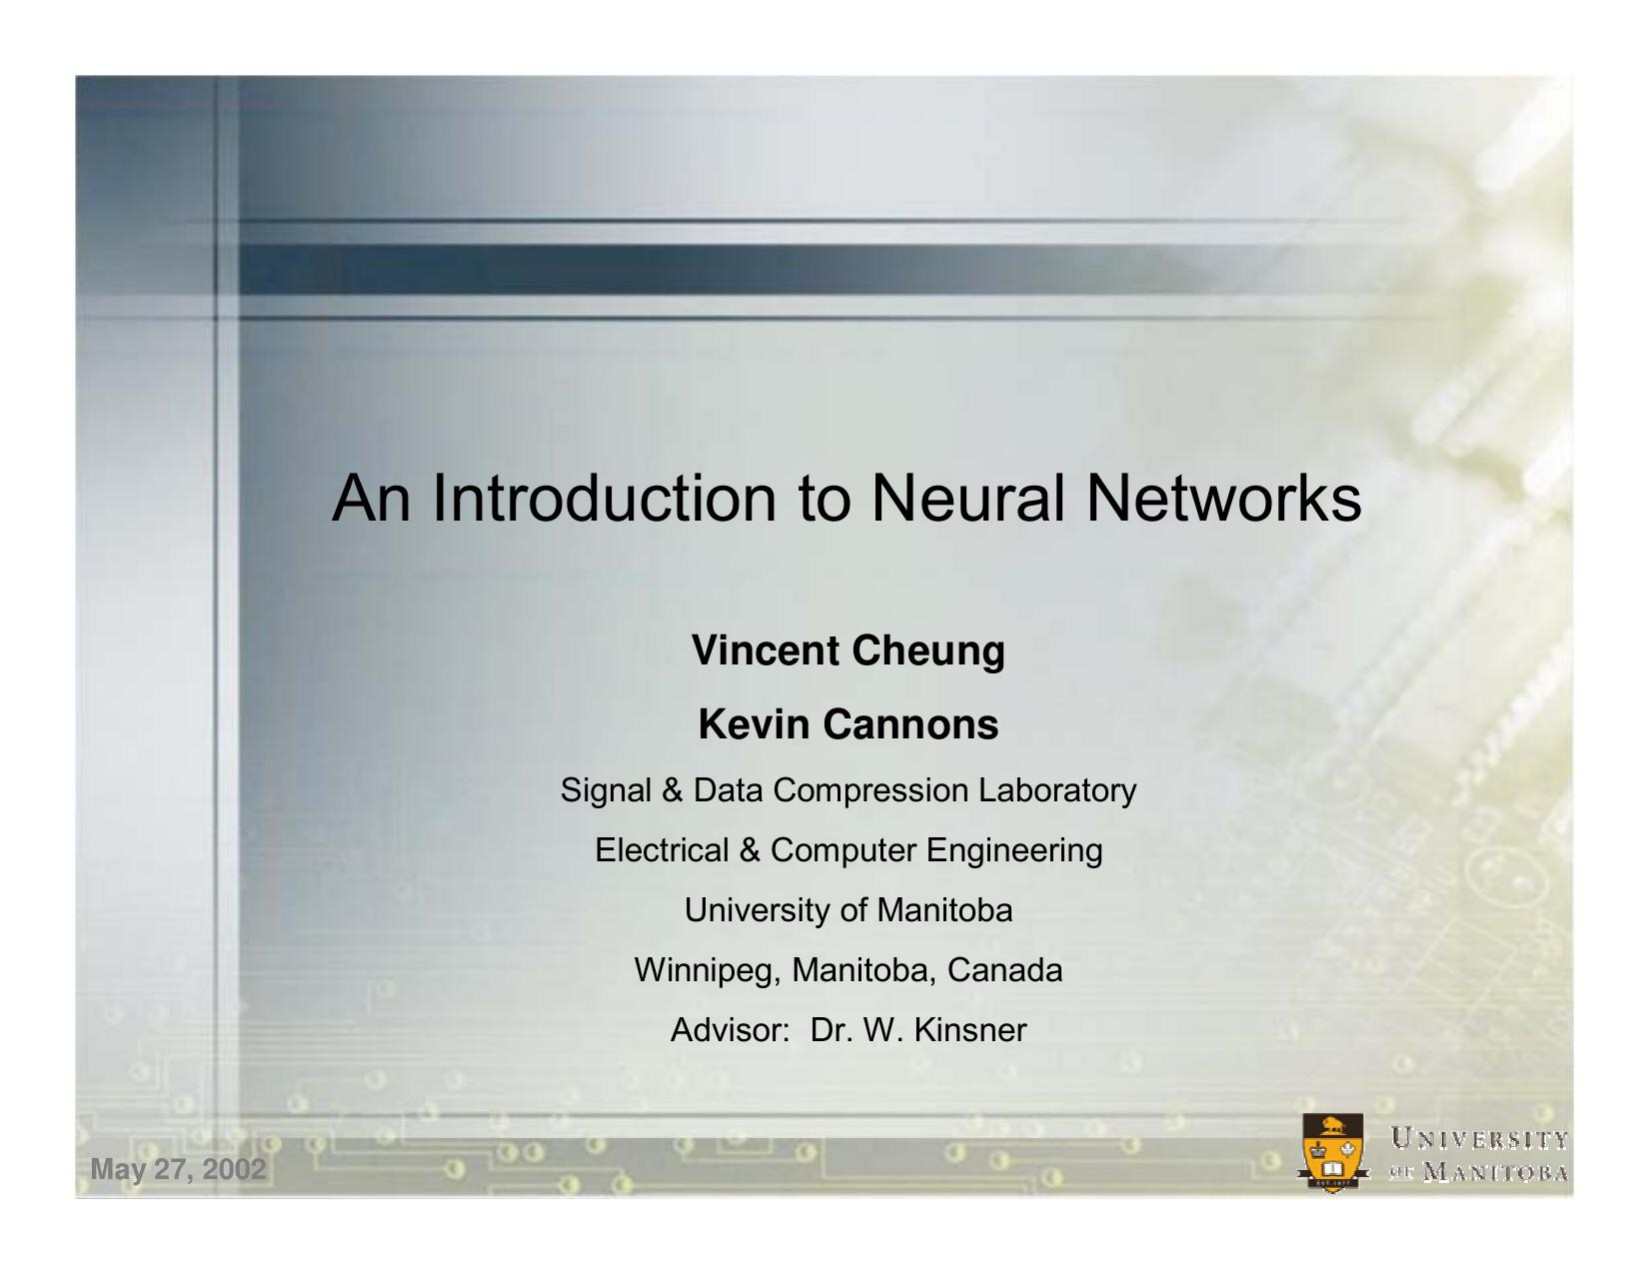 Microsoft PowerPoint - Neural Networks.ppt